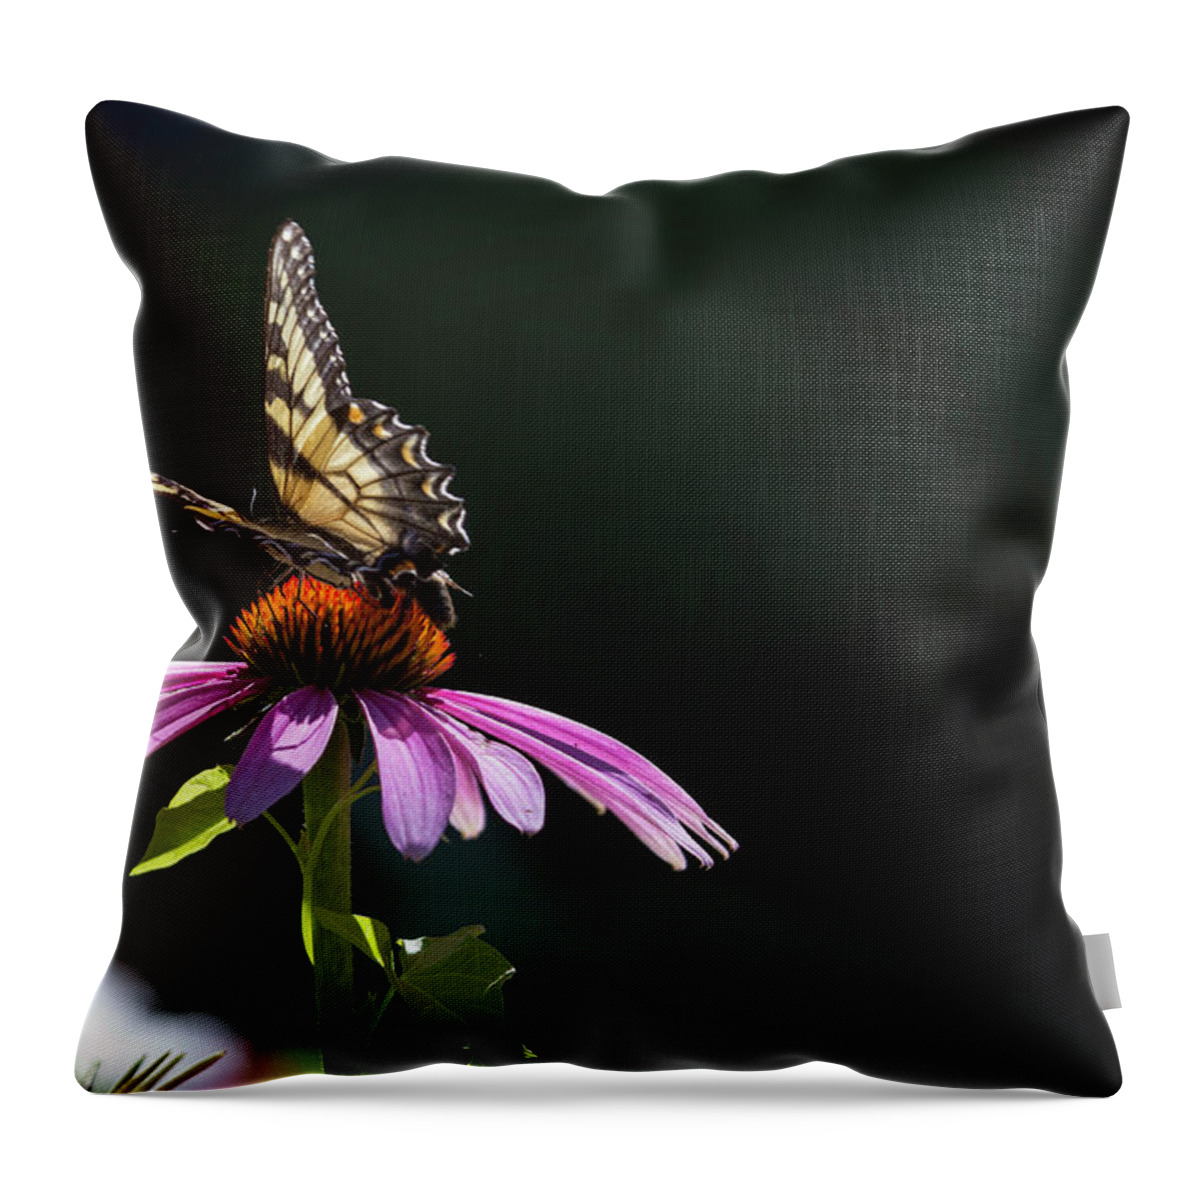  Throw Pillow featuring the photograph Always June by Phil Mancuso